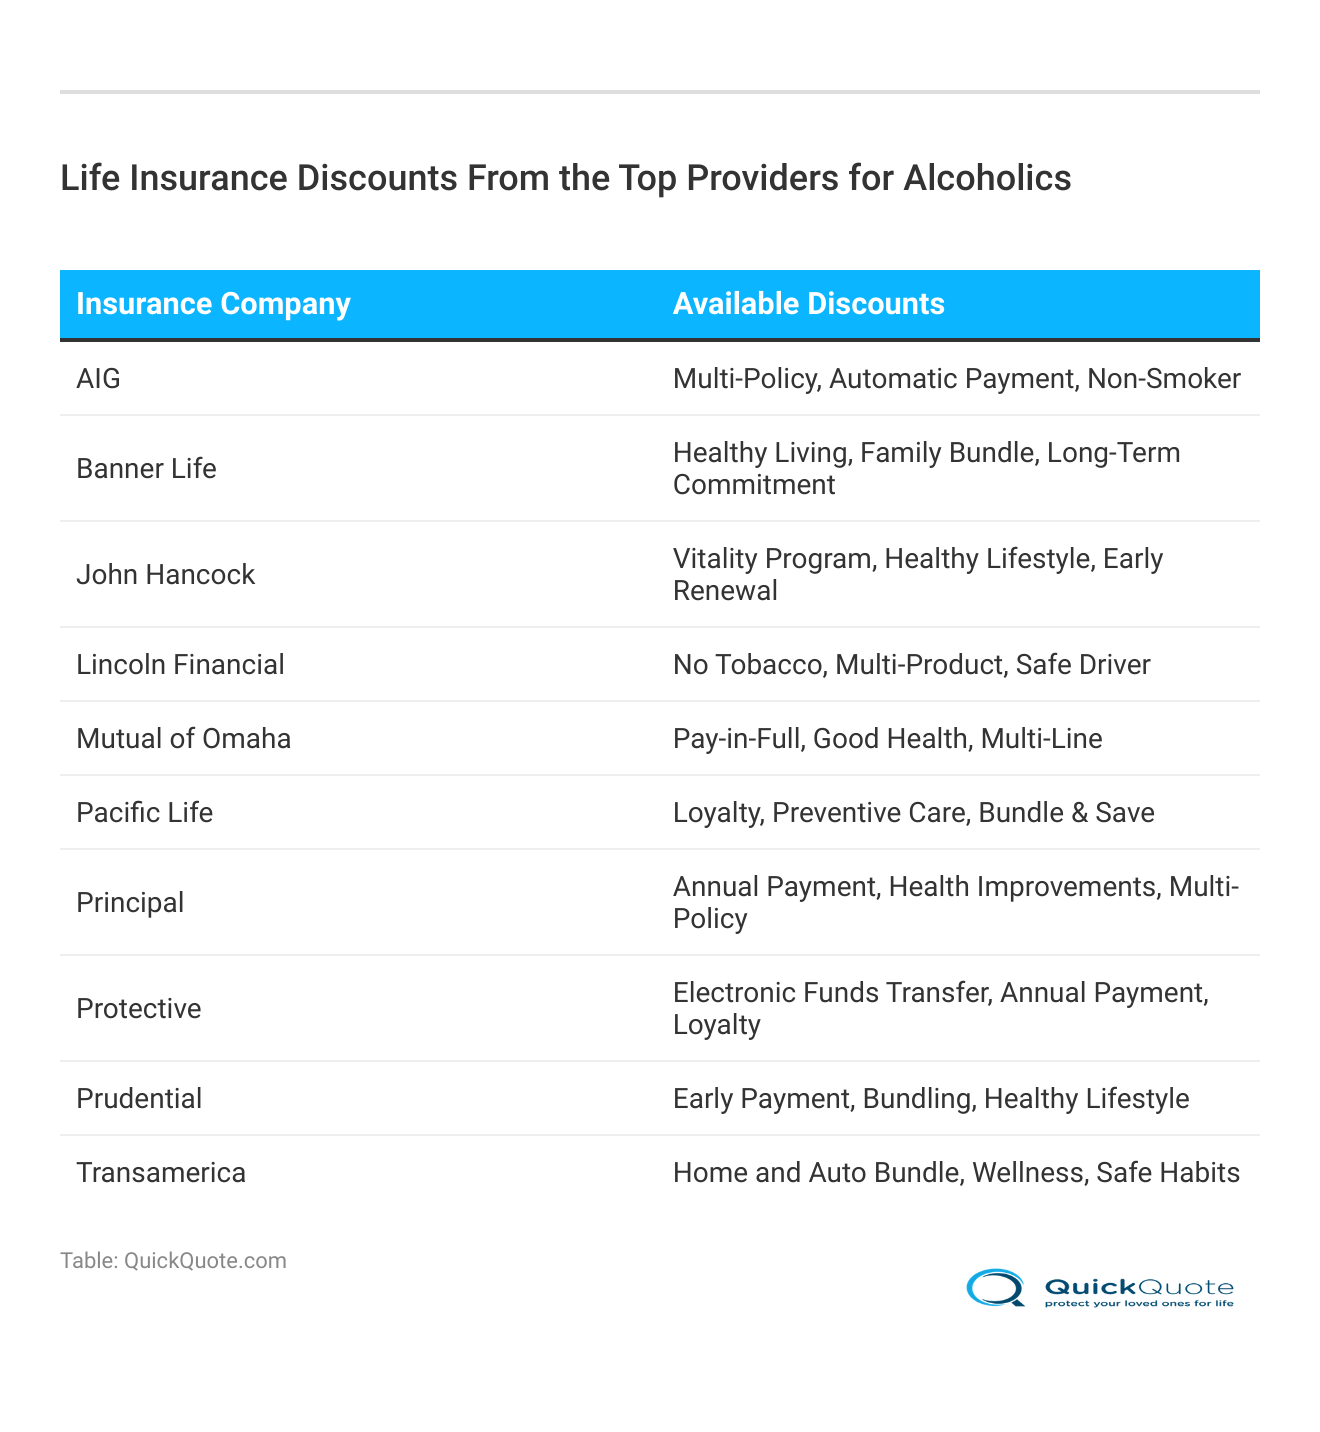 <h3>Life Insurance Discounts From the Top Providers for Alcoholics</h3>